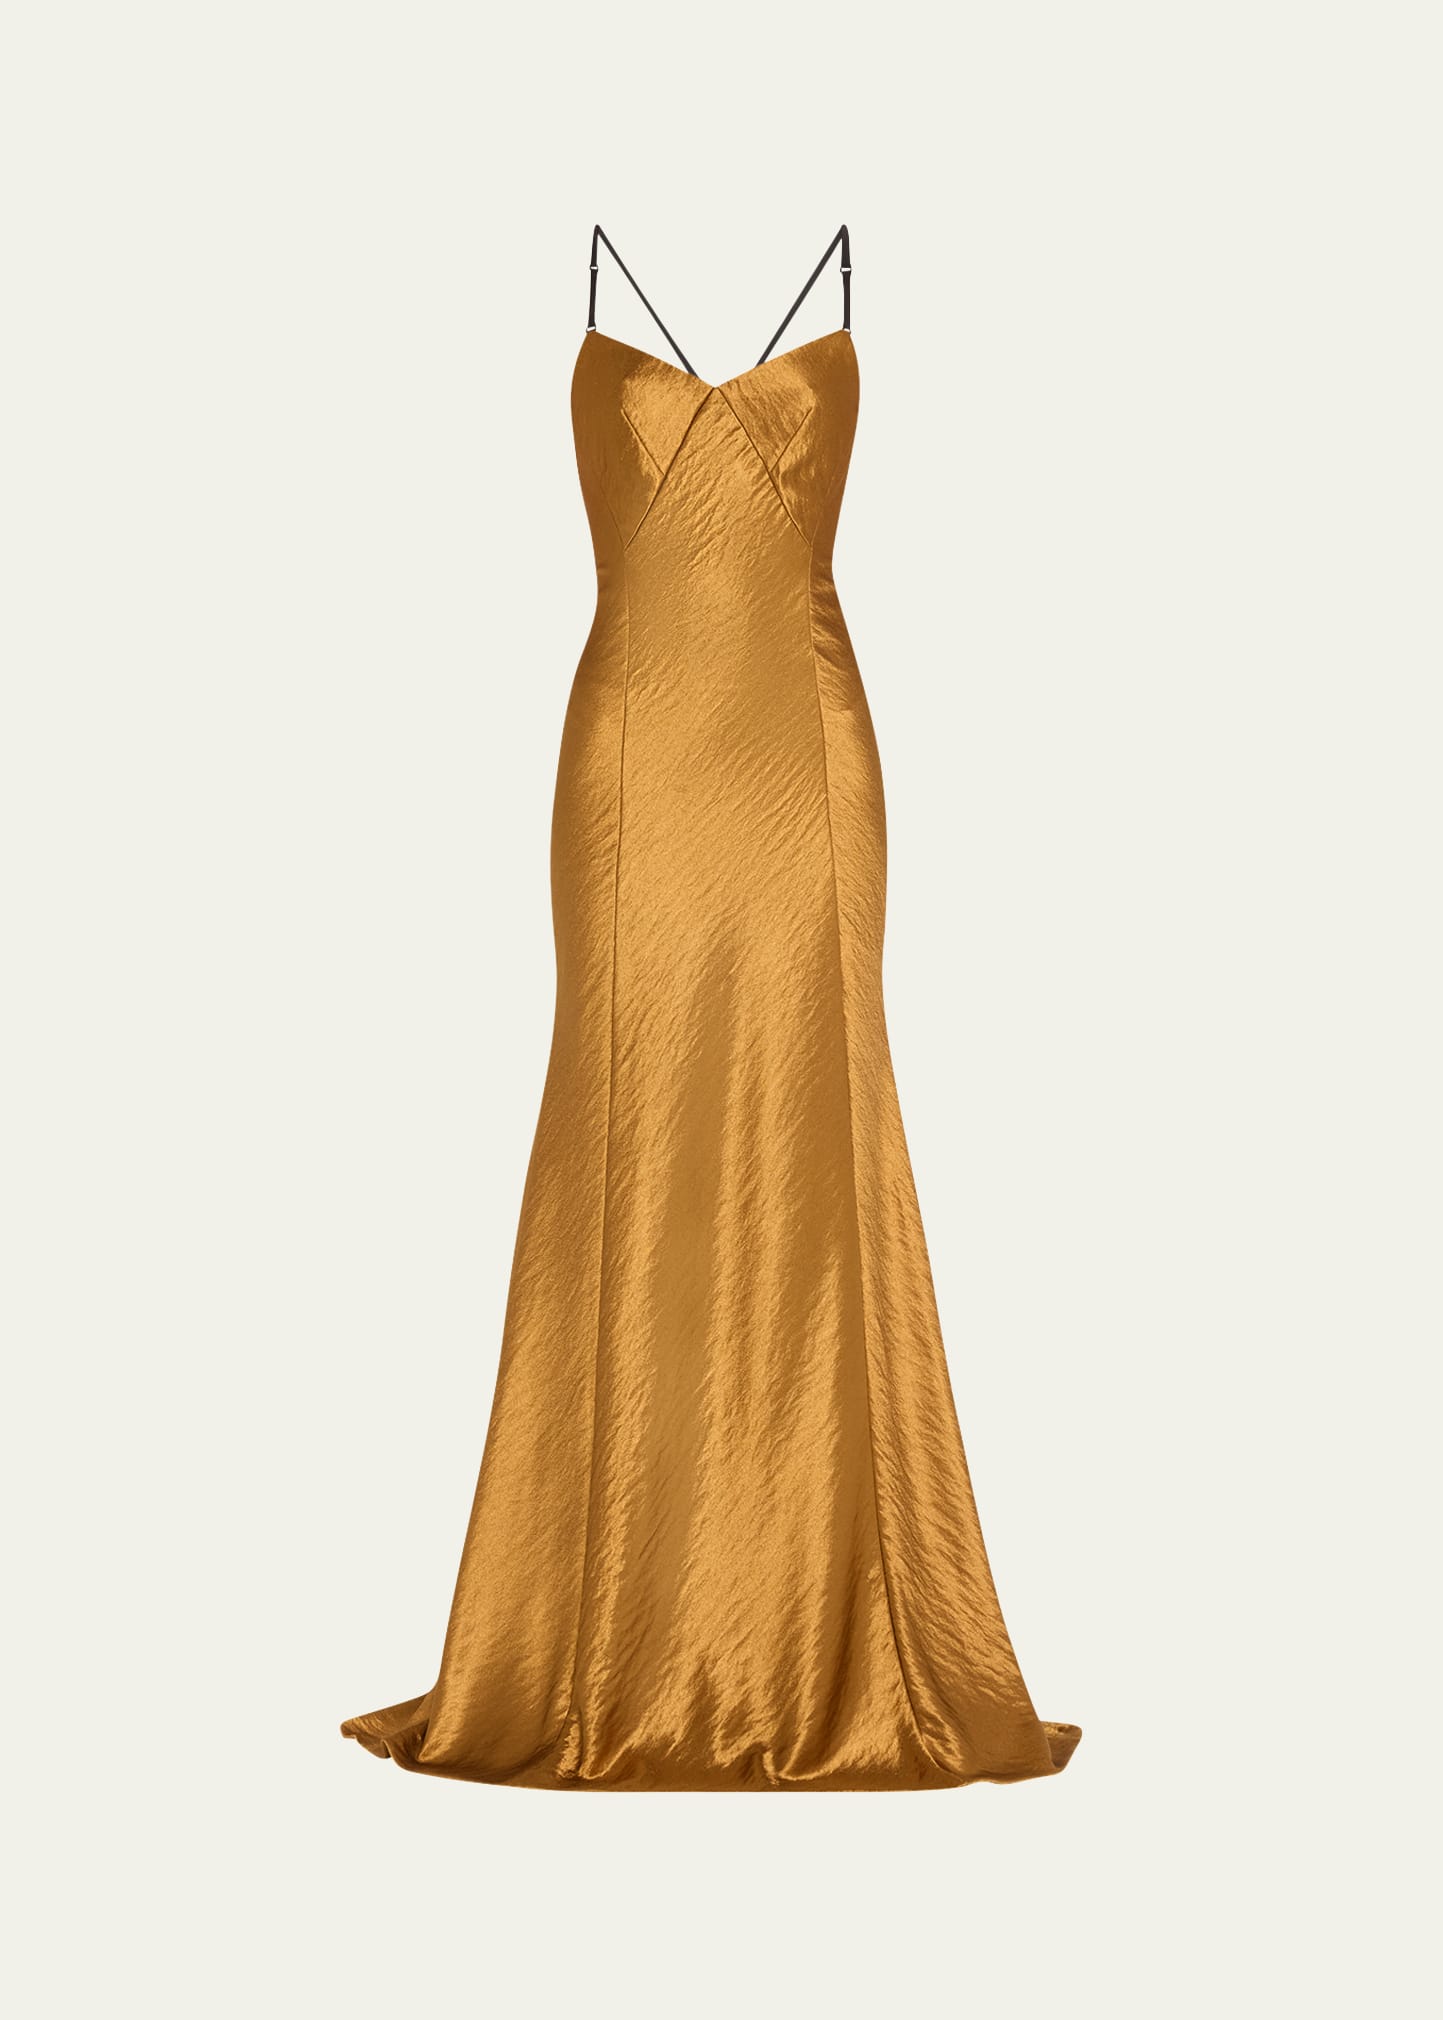 Hammered Satin Backless Gown